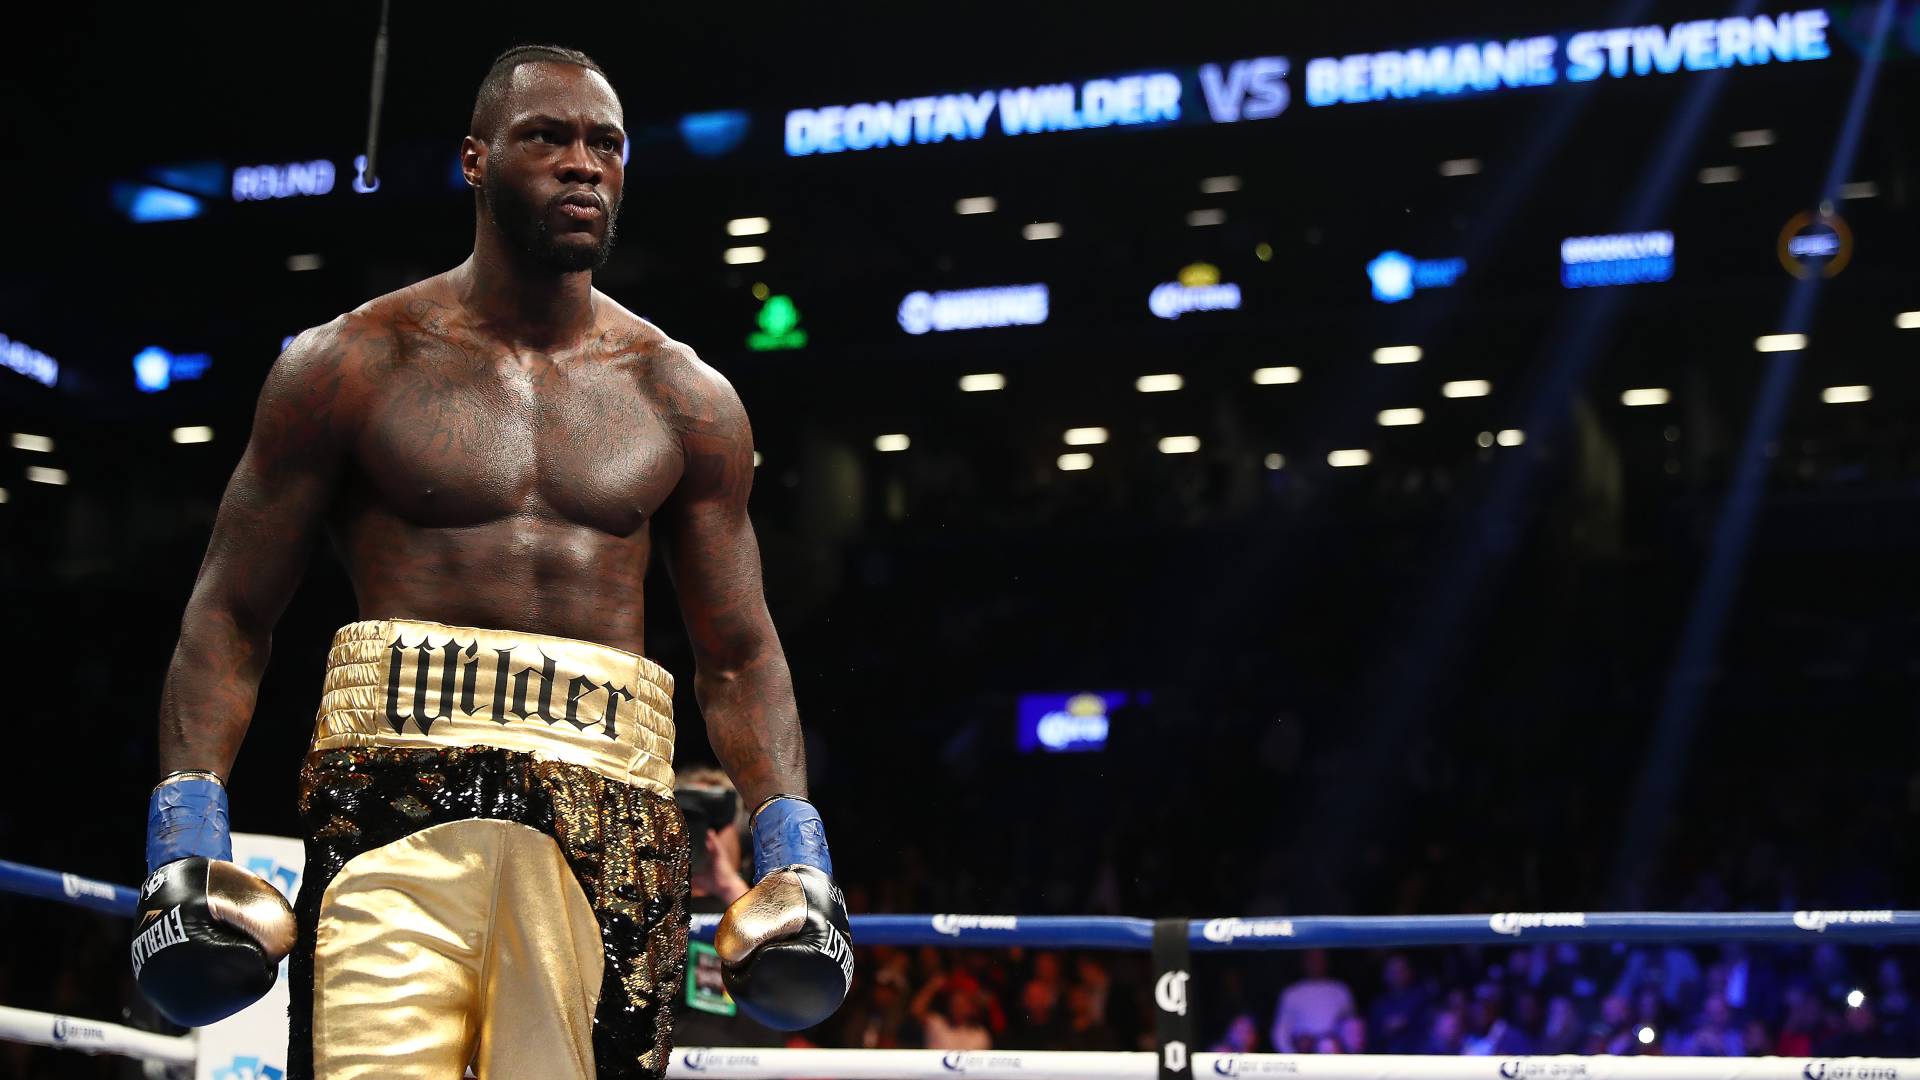 Anthony Joshua doesn’t have the heart to fight me – Deontay Wilder